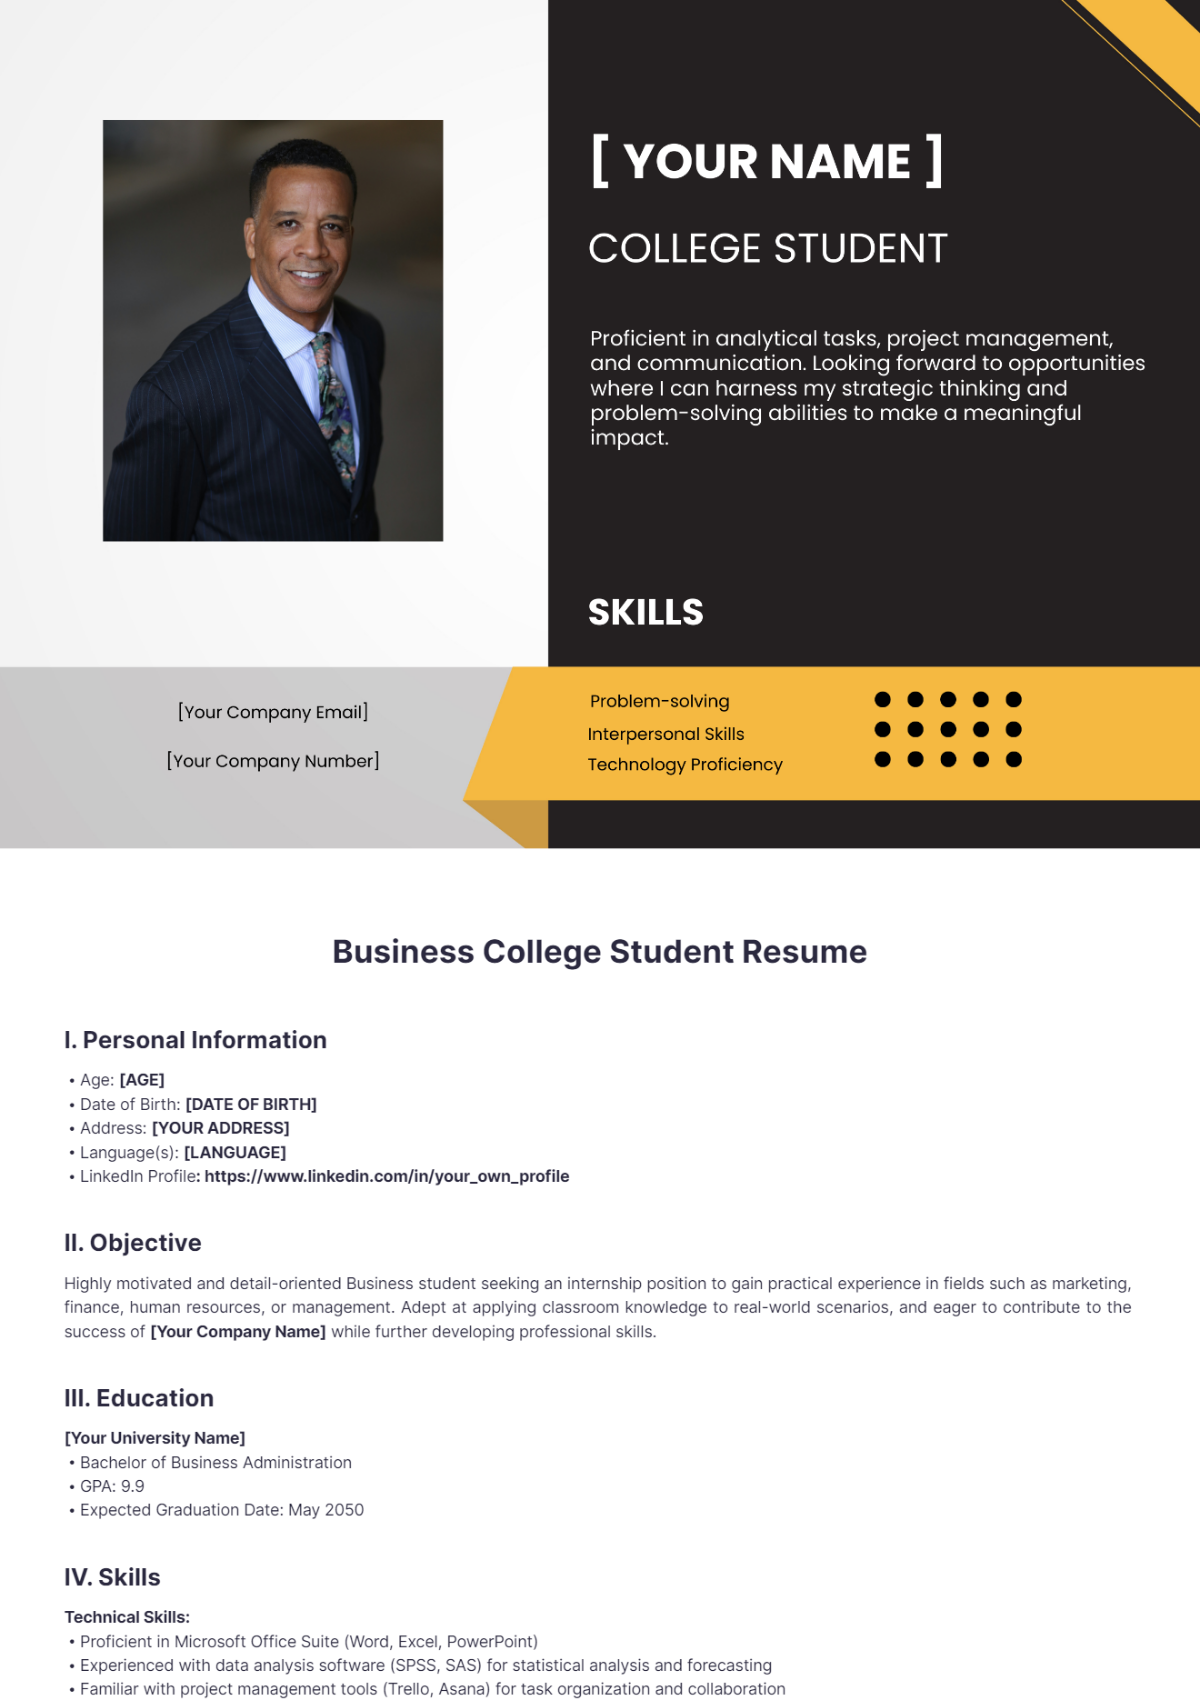 Business College Student Resume